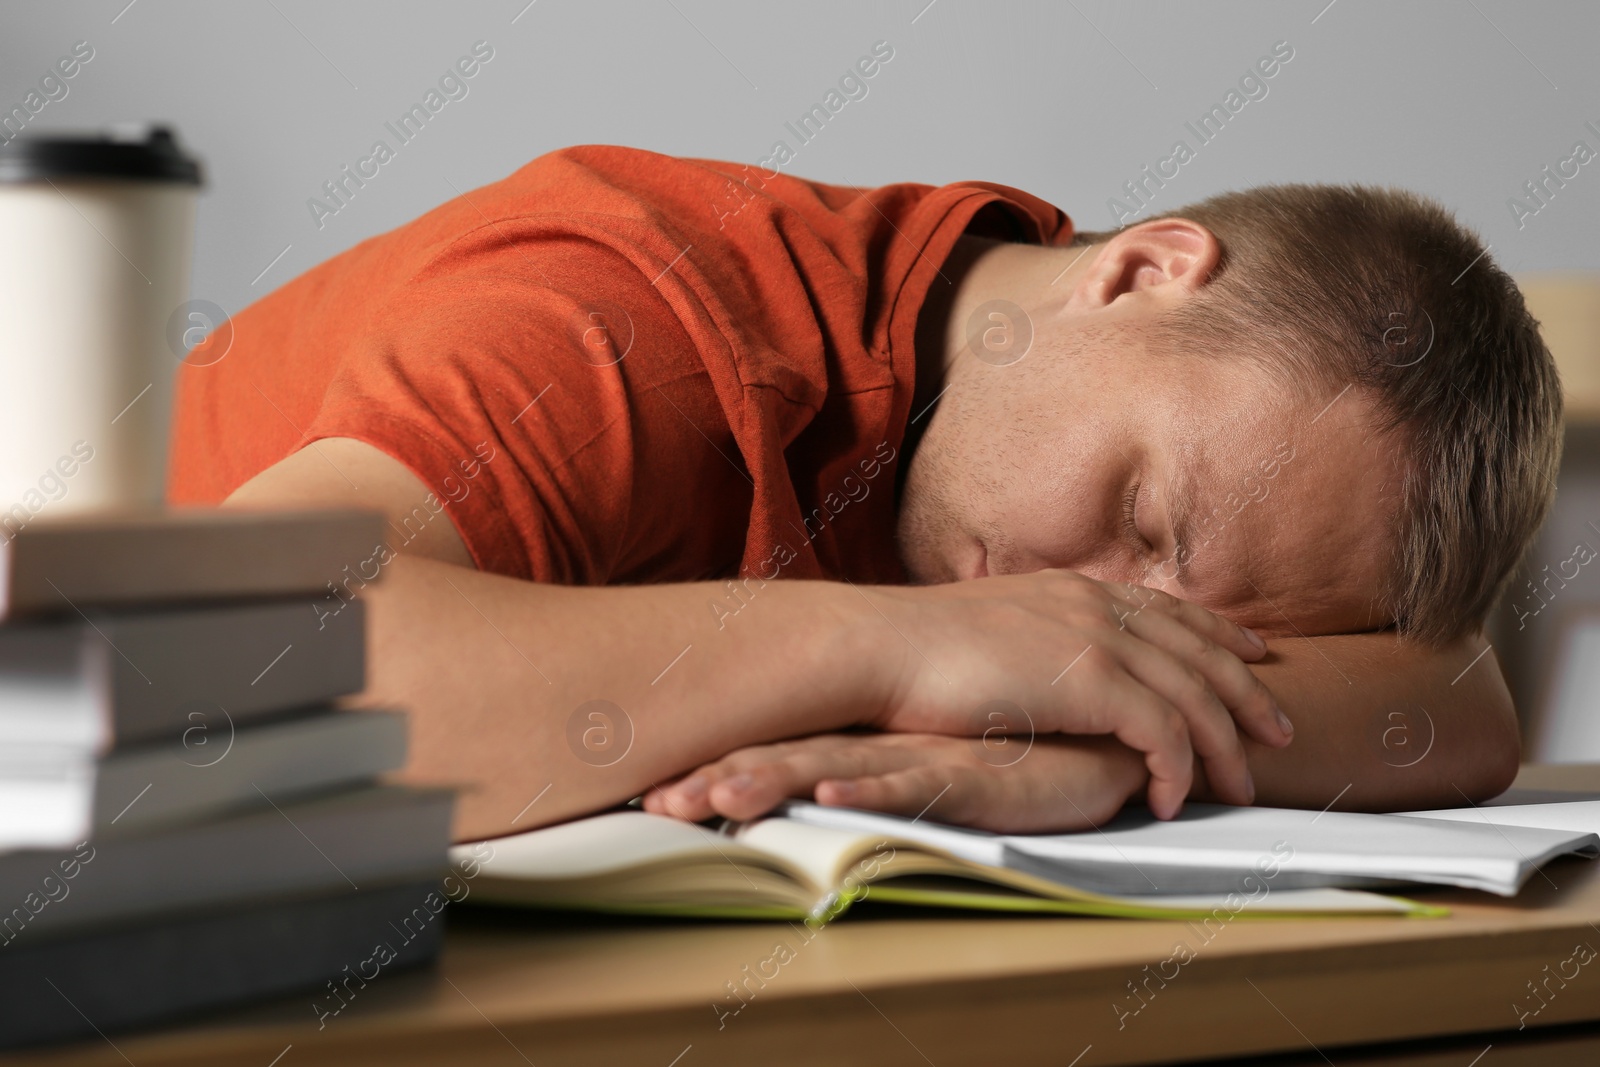 Photo of Tired man sleeping near books at wooden table indoors